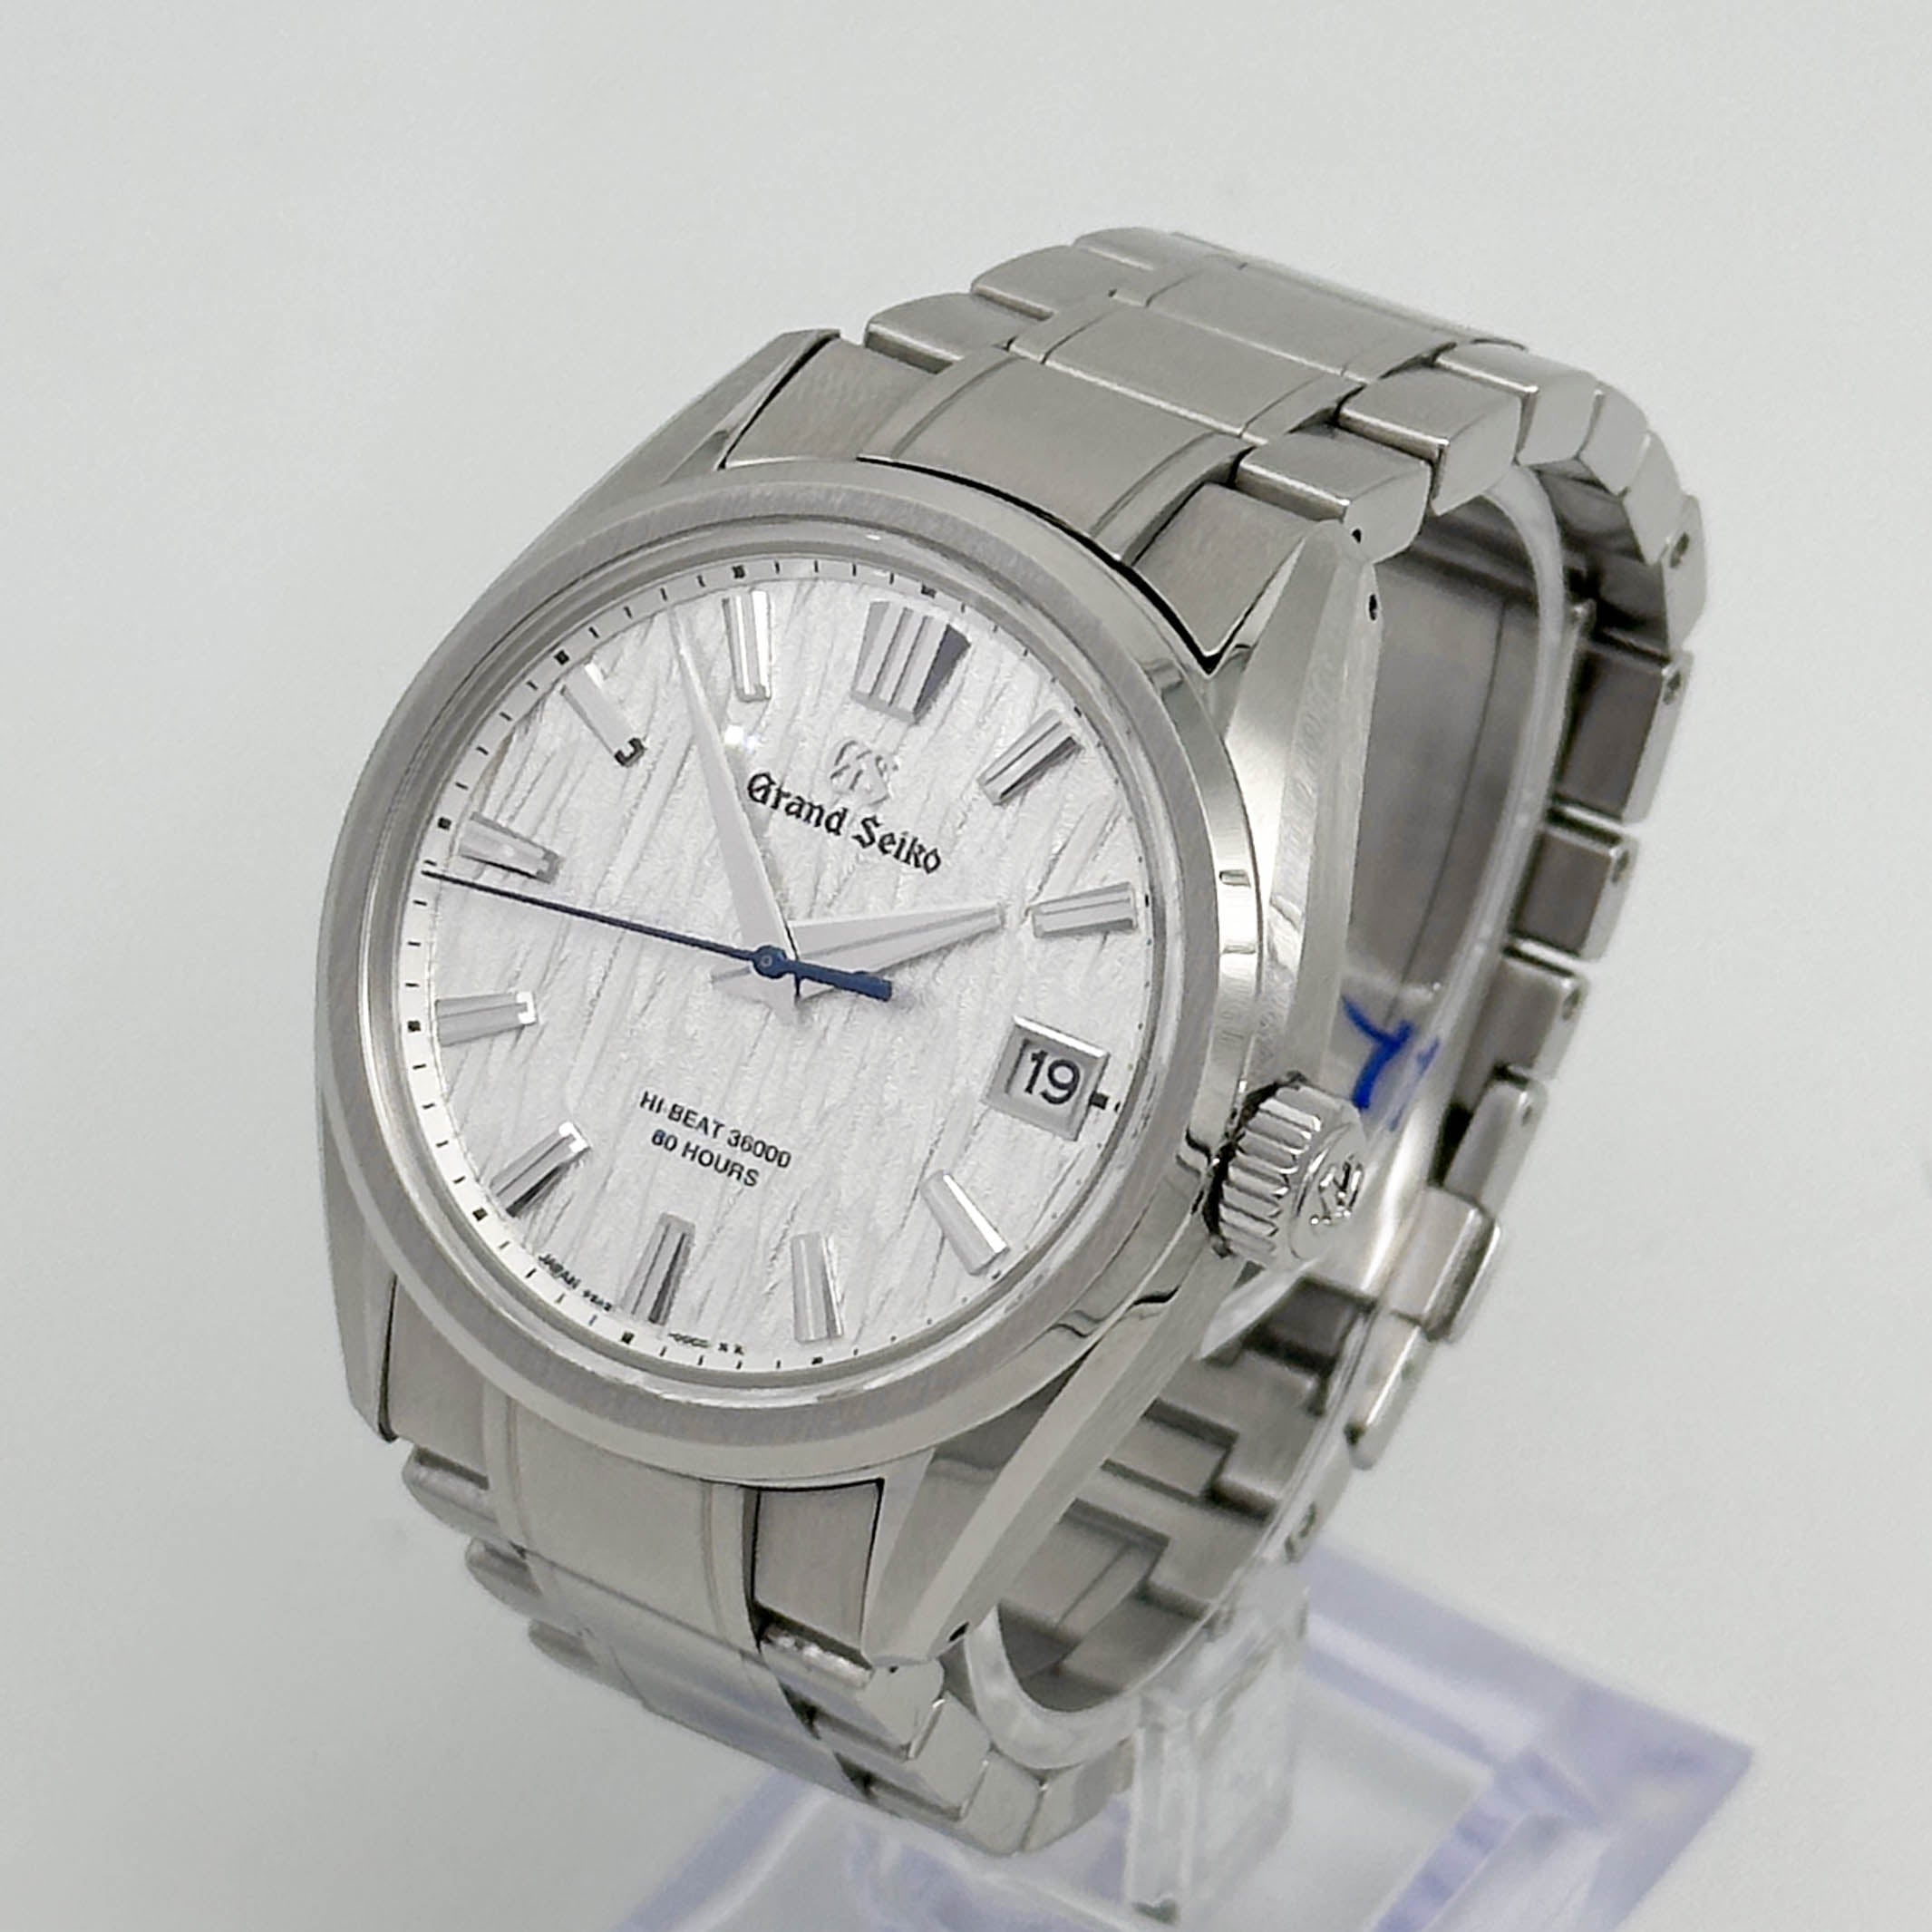 Grand Seiko Heritage Collection Stahl SLGH005 - 2022